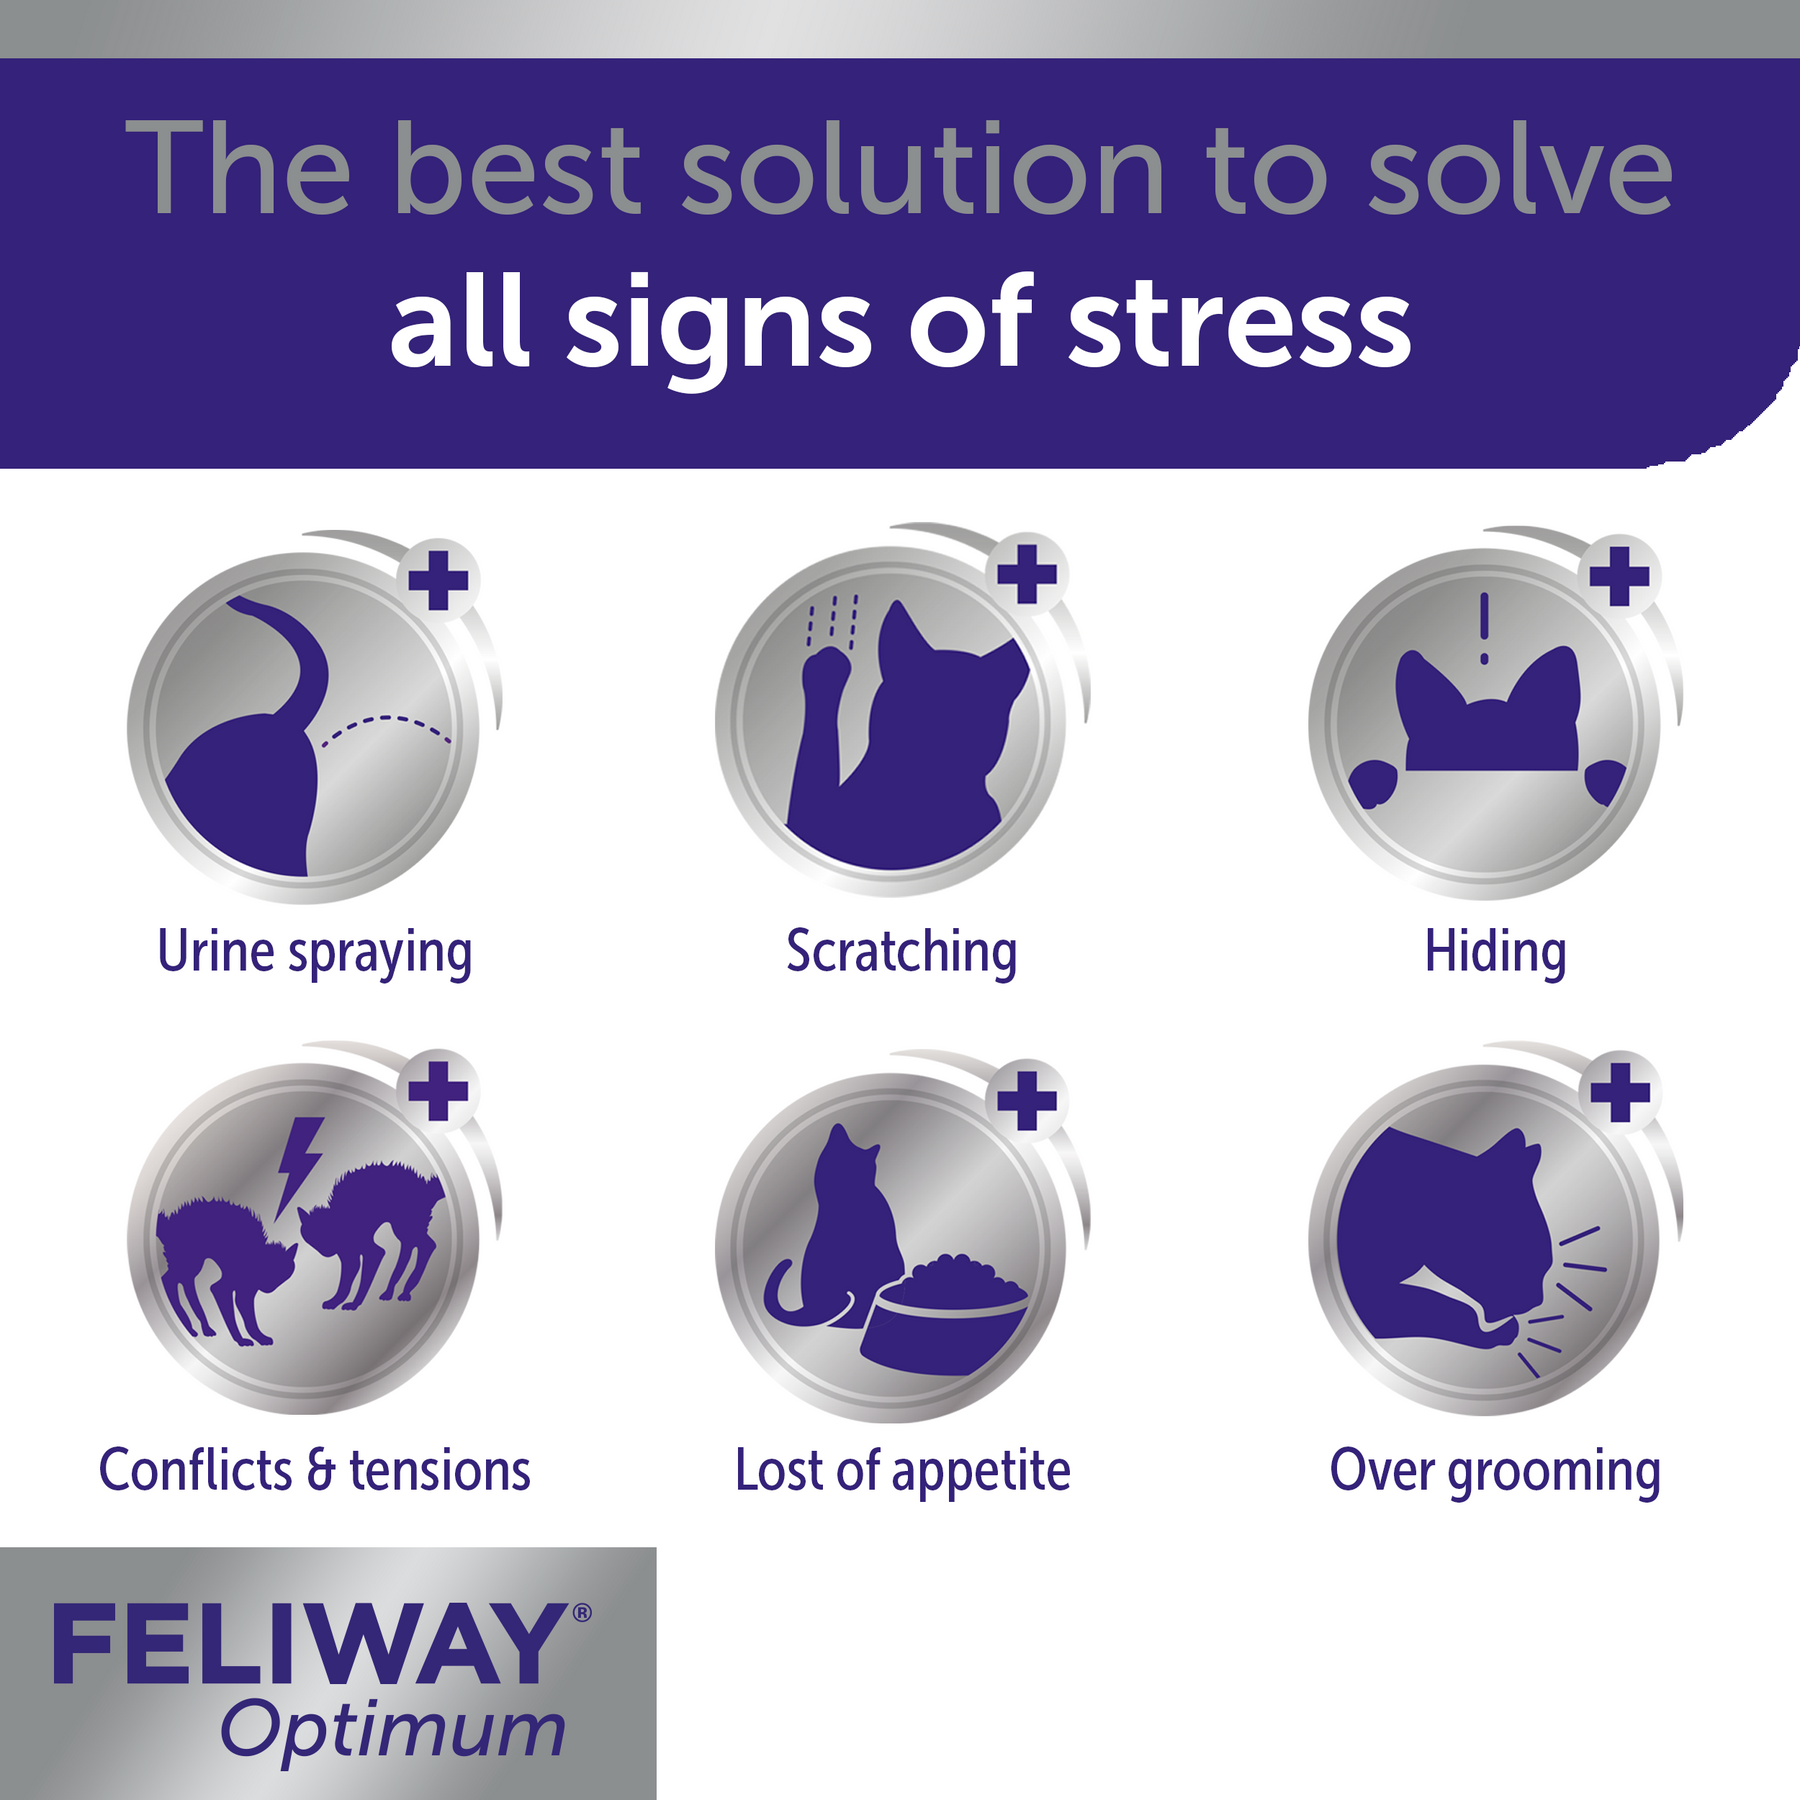 FELIWAY Optimum diffuser & 30 day refill, the best solution to